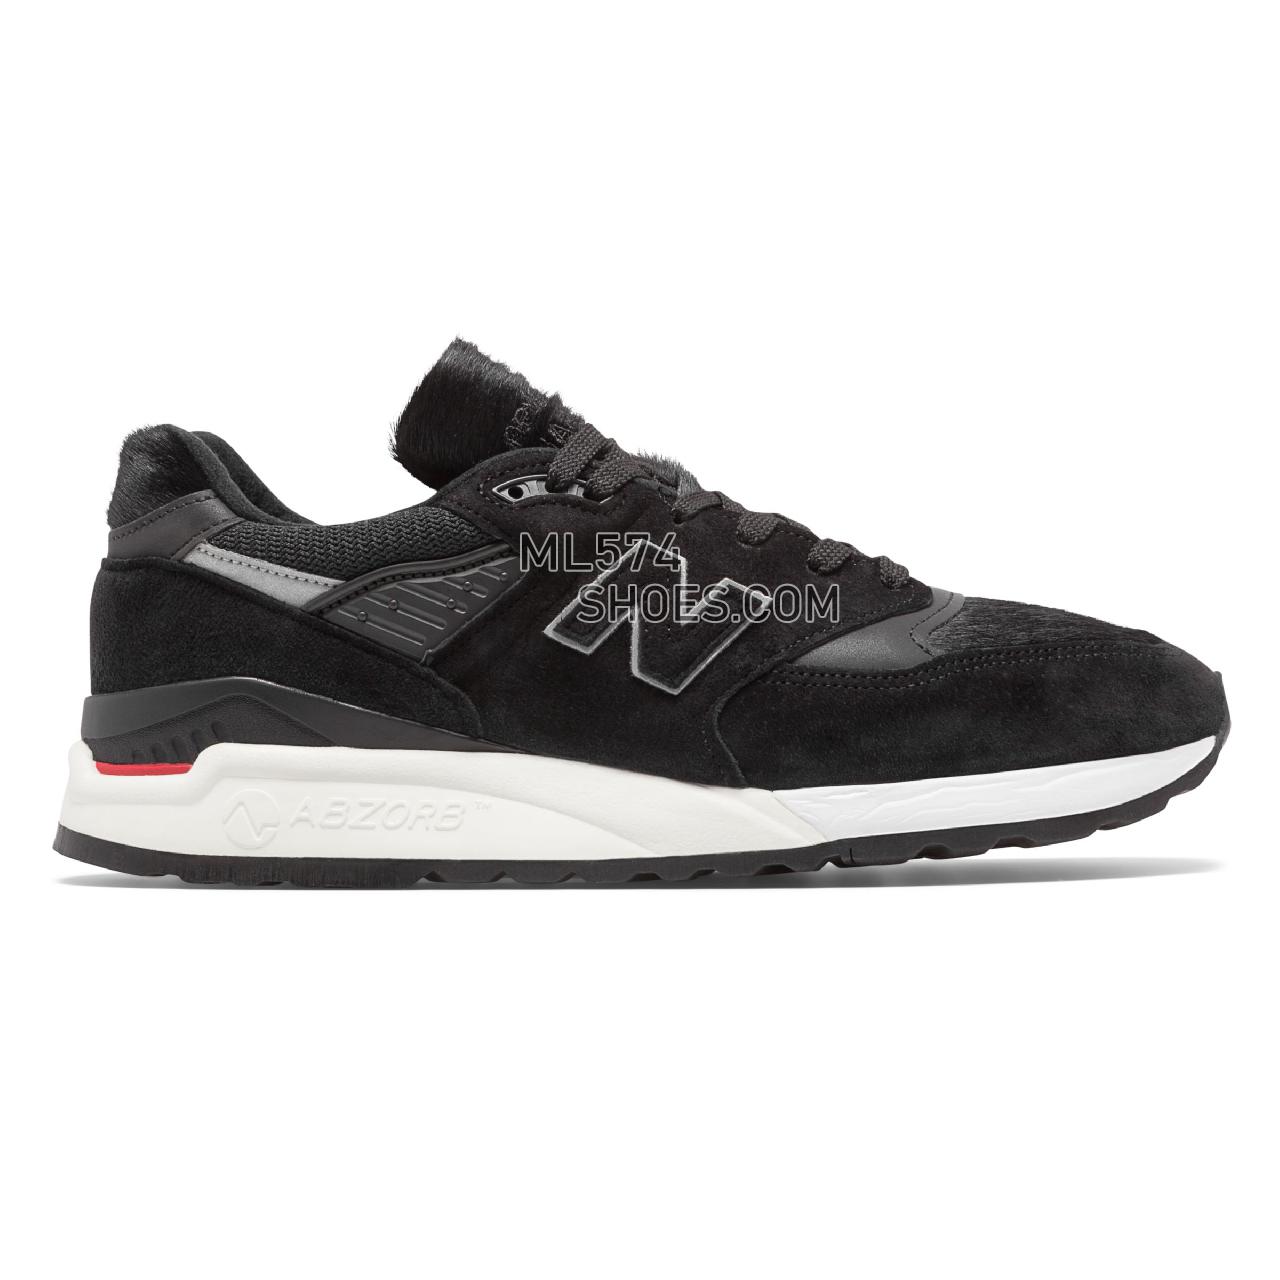 New Balance Made in US 998 - Men's 998 Made in US Classic M998-EPL - Black with Red - M998TCB